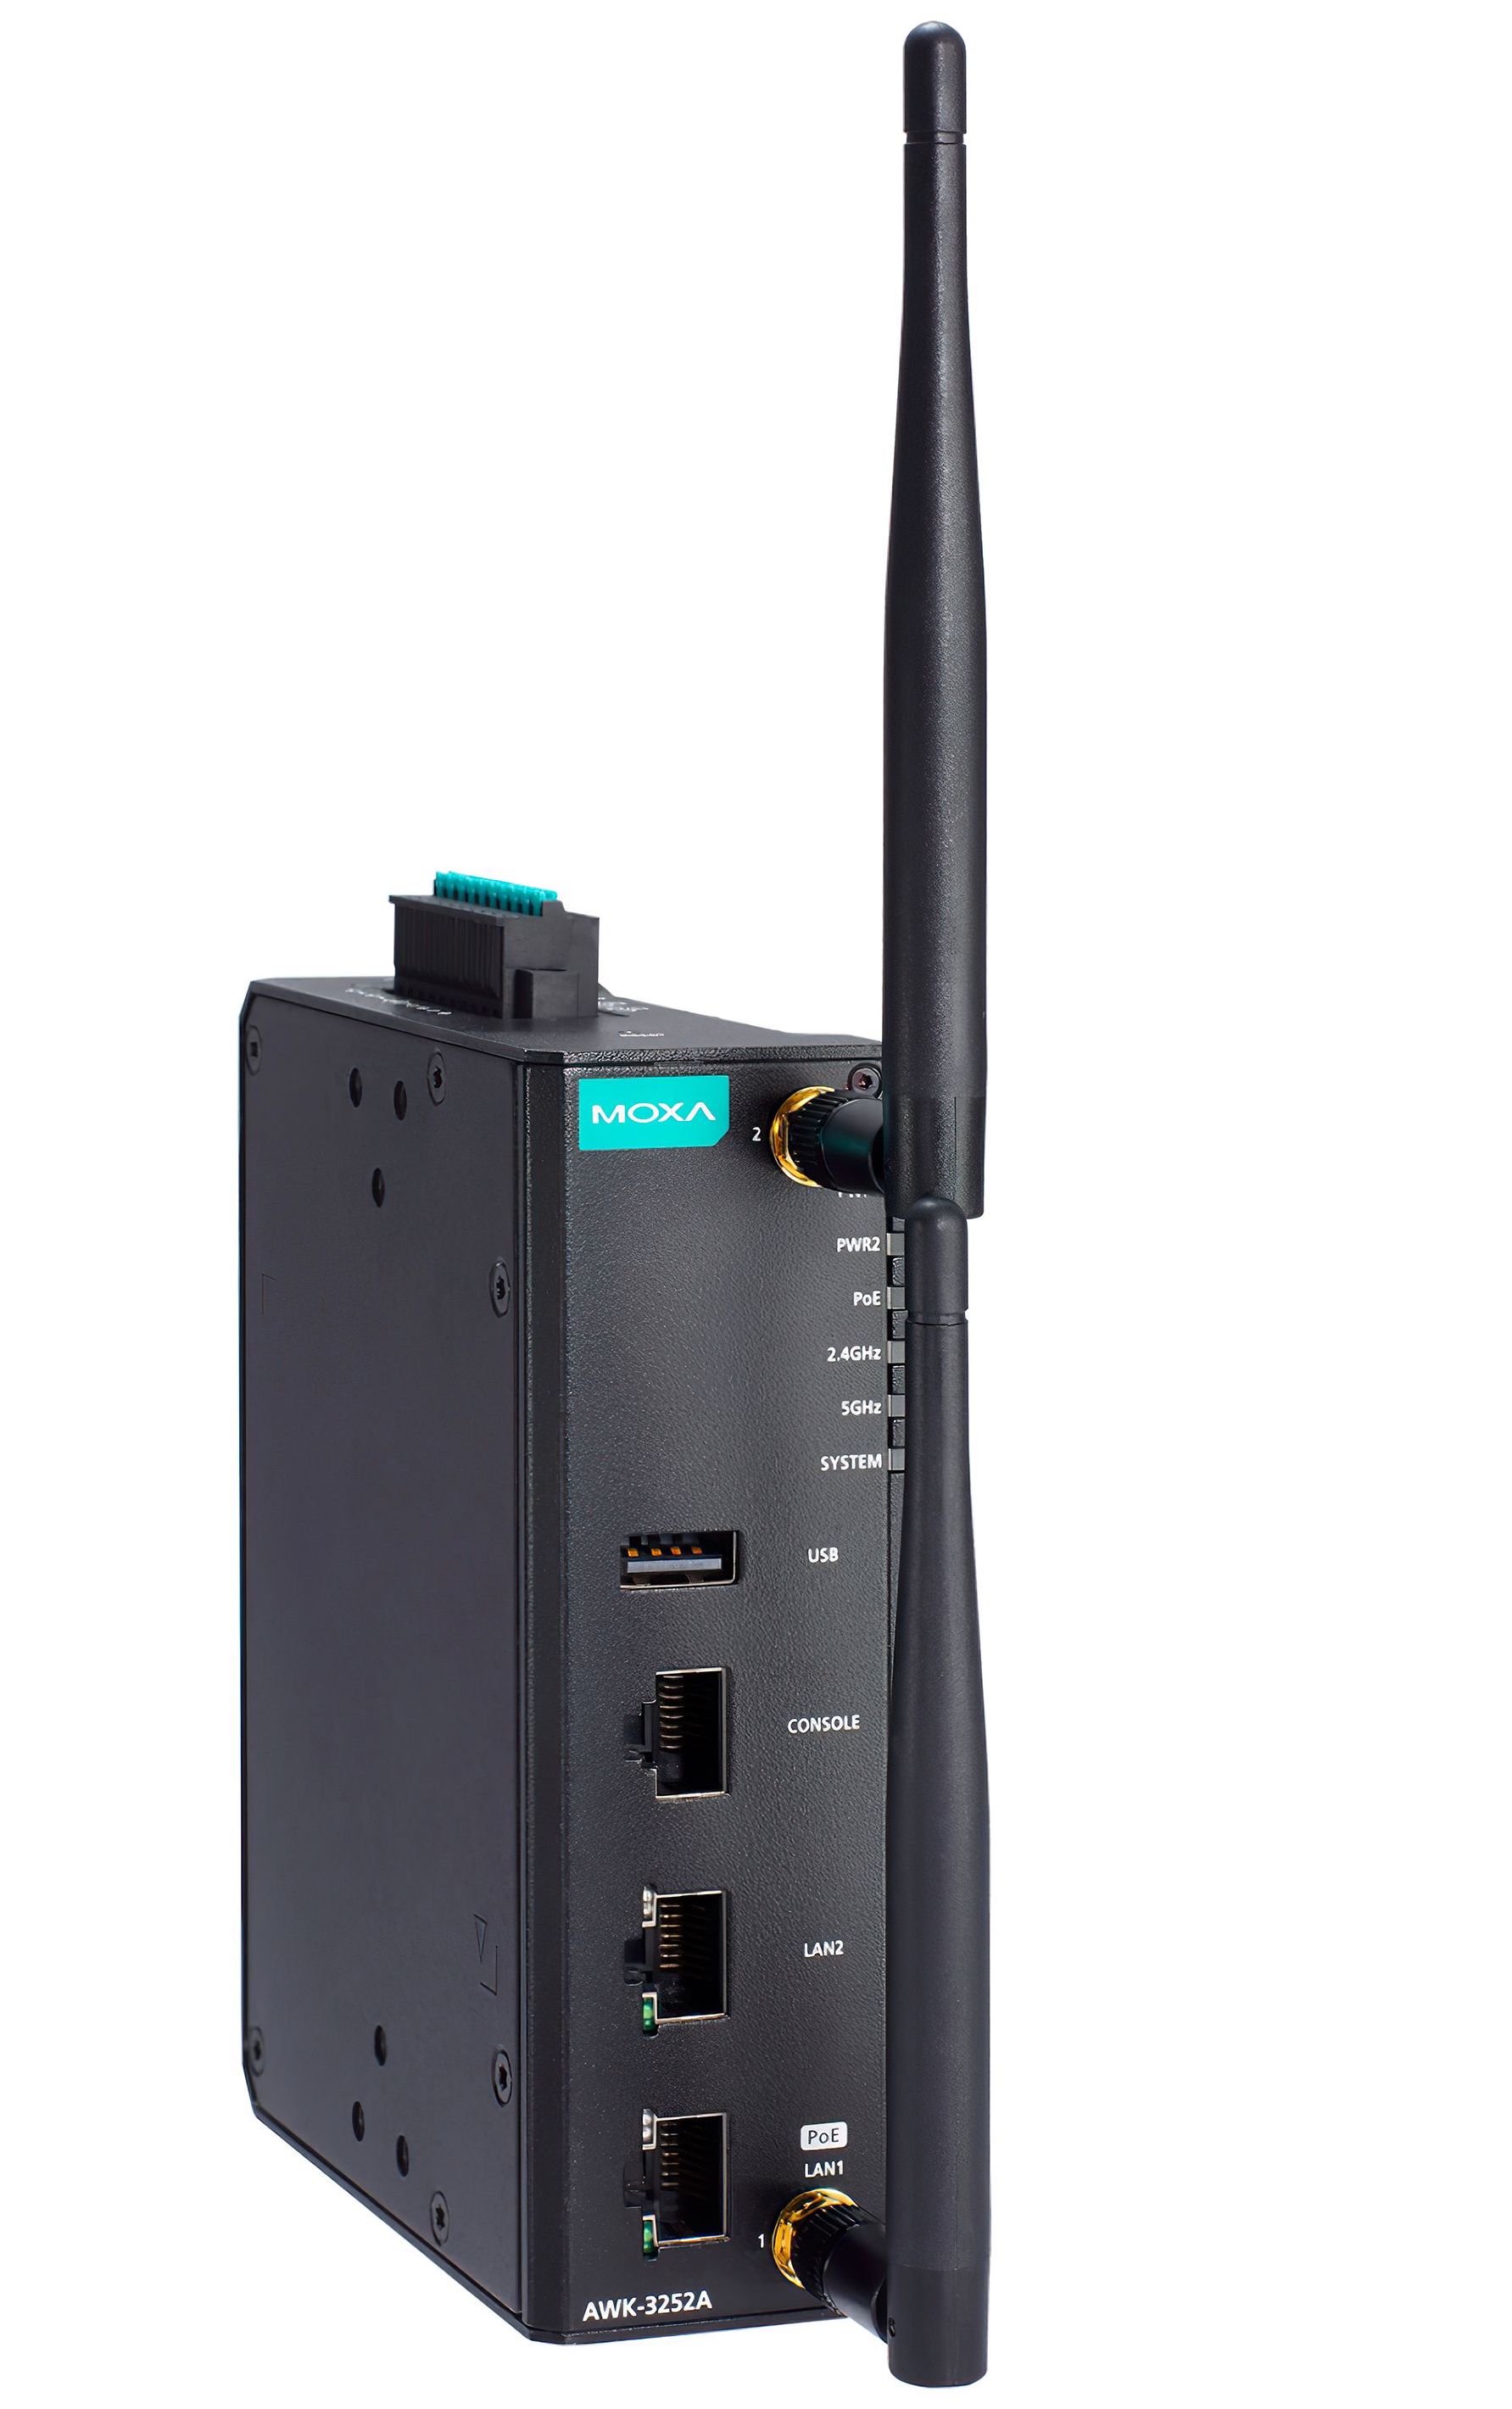 Moxa Wireless AP/bridge/client Accelerates Data Transmission Speeds in Industrial Networks